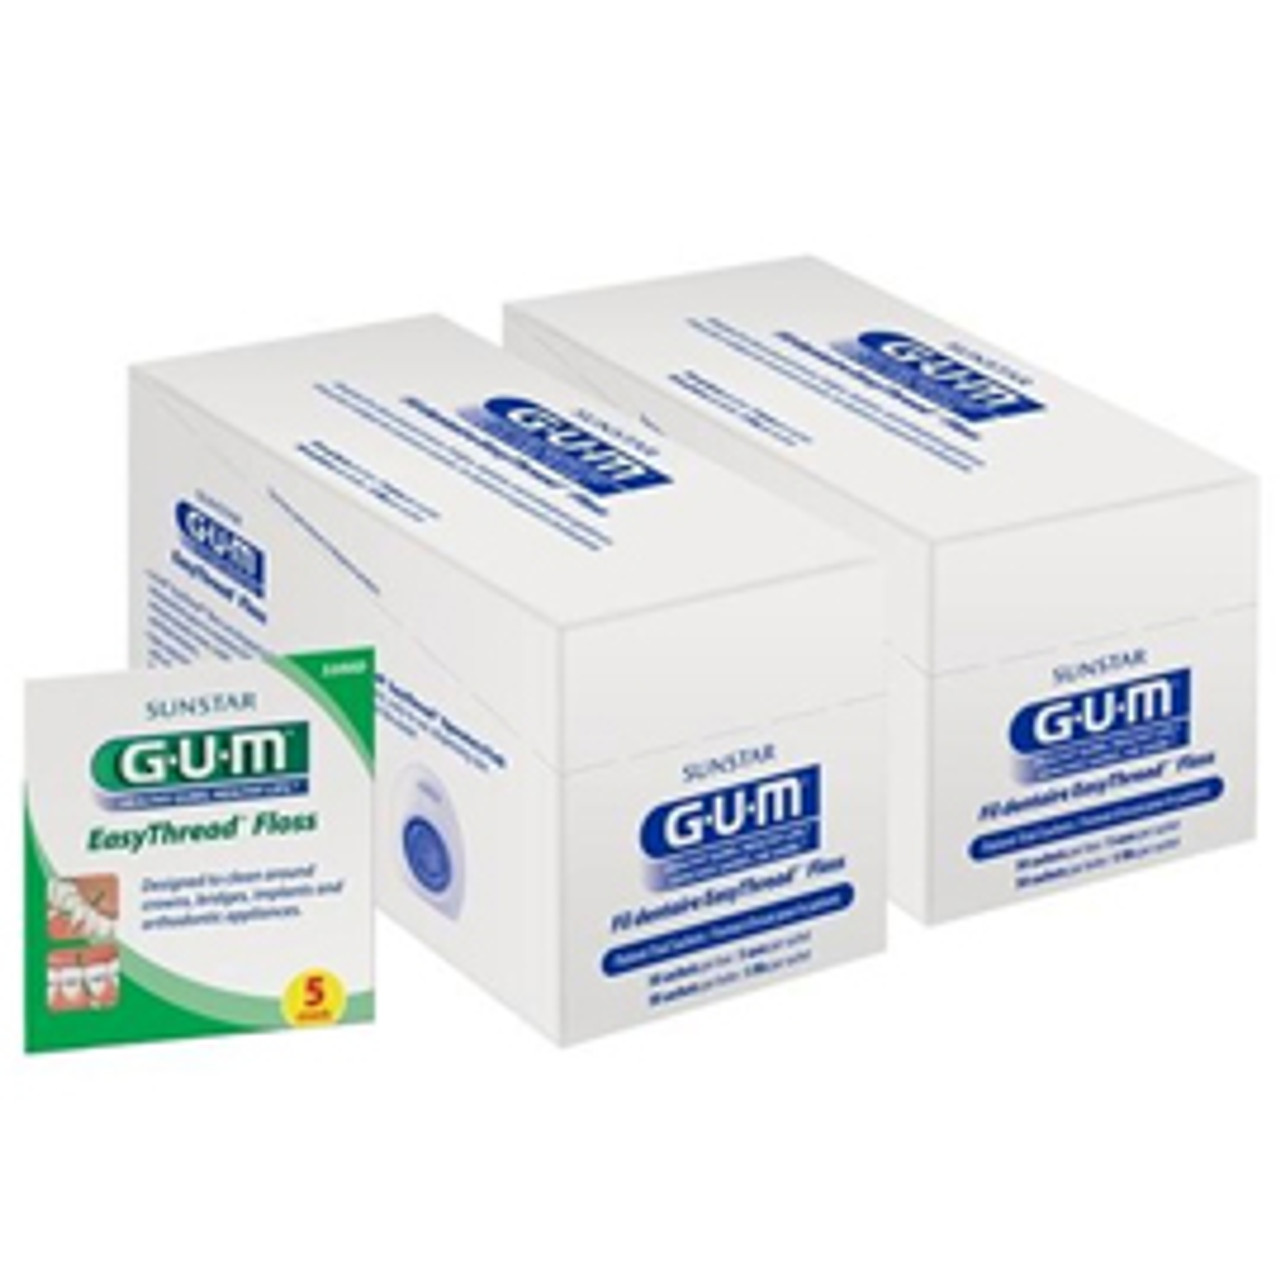 Dental product sample boxes